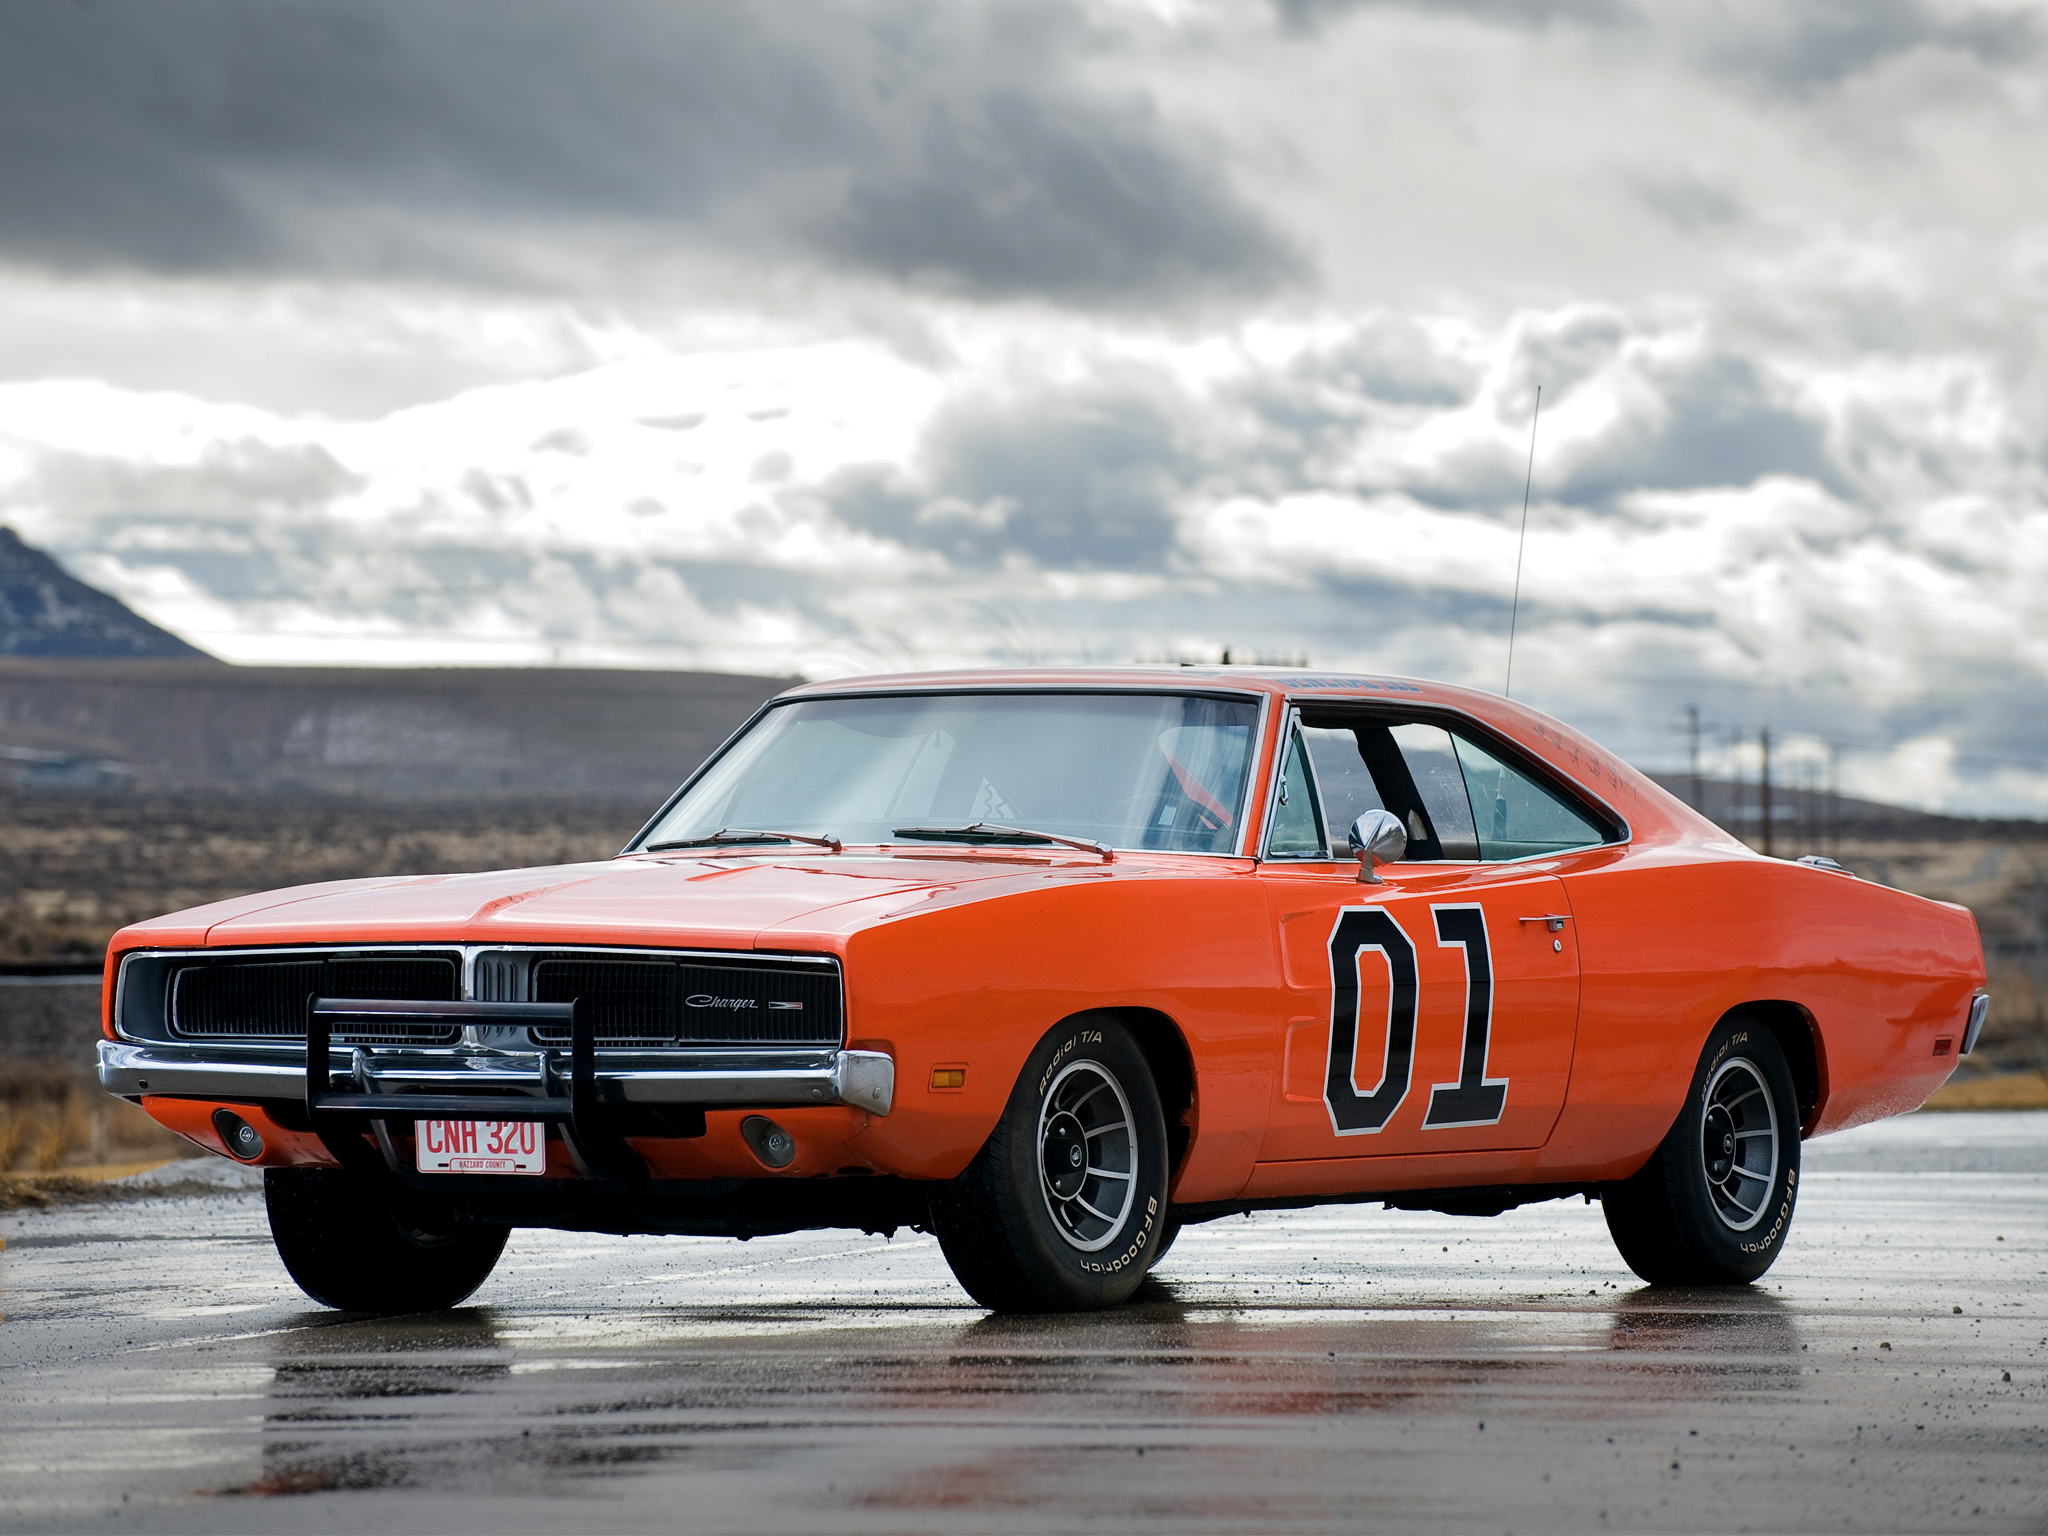 Car Chase Heroes on Twitter Wallpaper of the week The General Lee   Save it to your phone set it as your background and enjoy Then jump back  on here and tweet